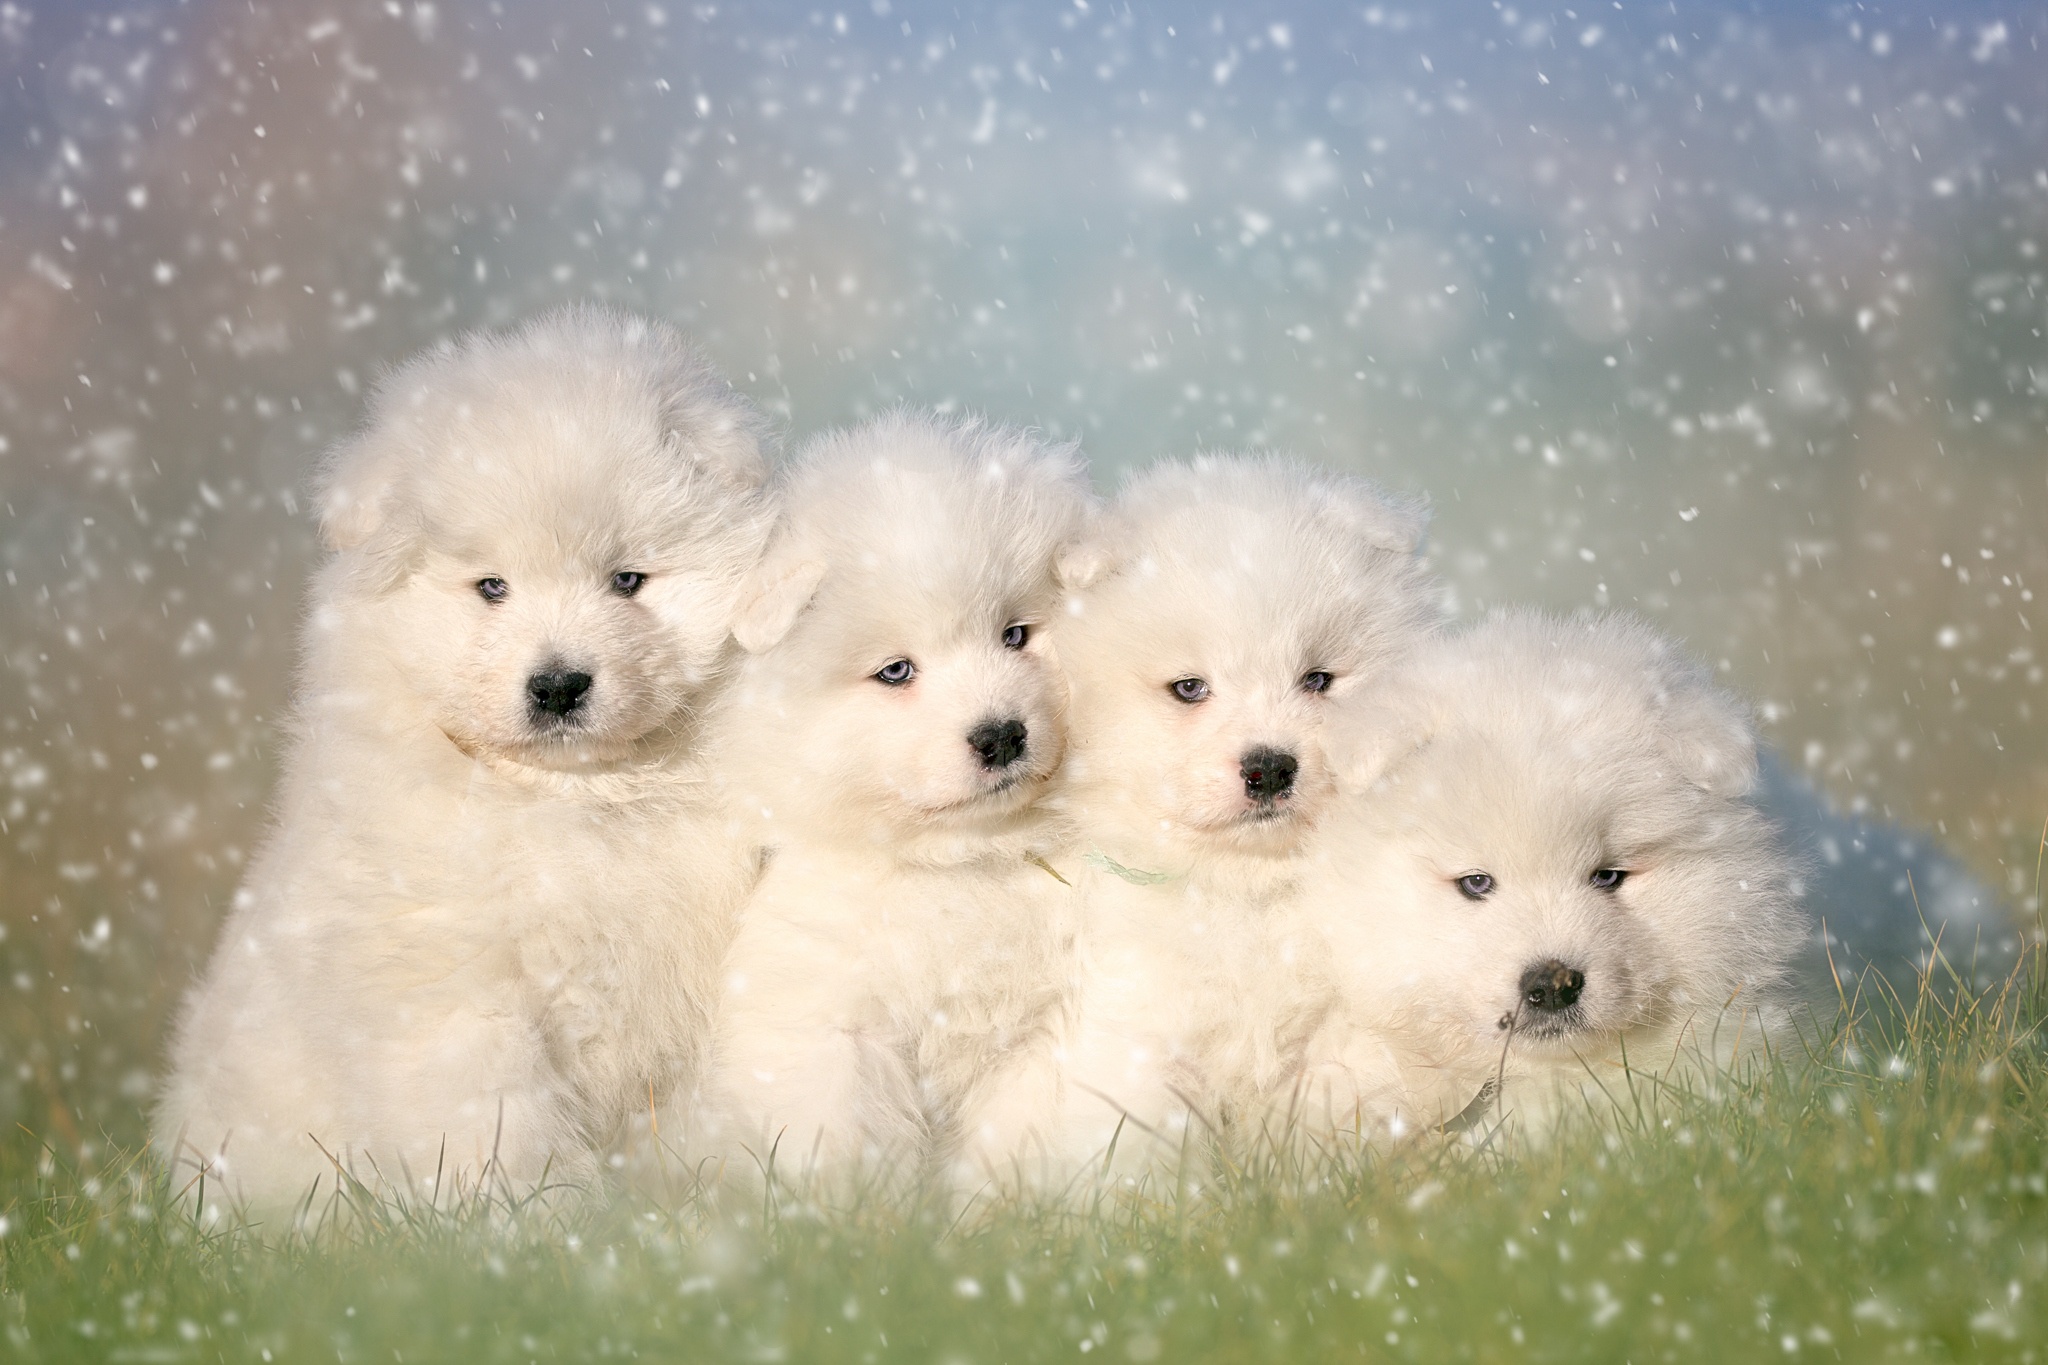 New Lock Screen Wallpapers animal, samoyed, baby animal, cute, dog, fluffy, puppy, dogs